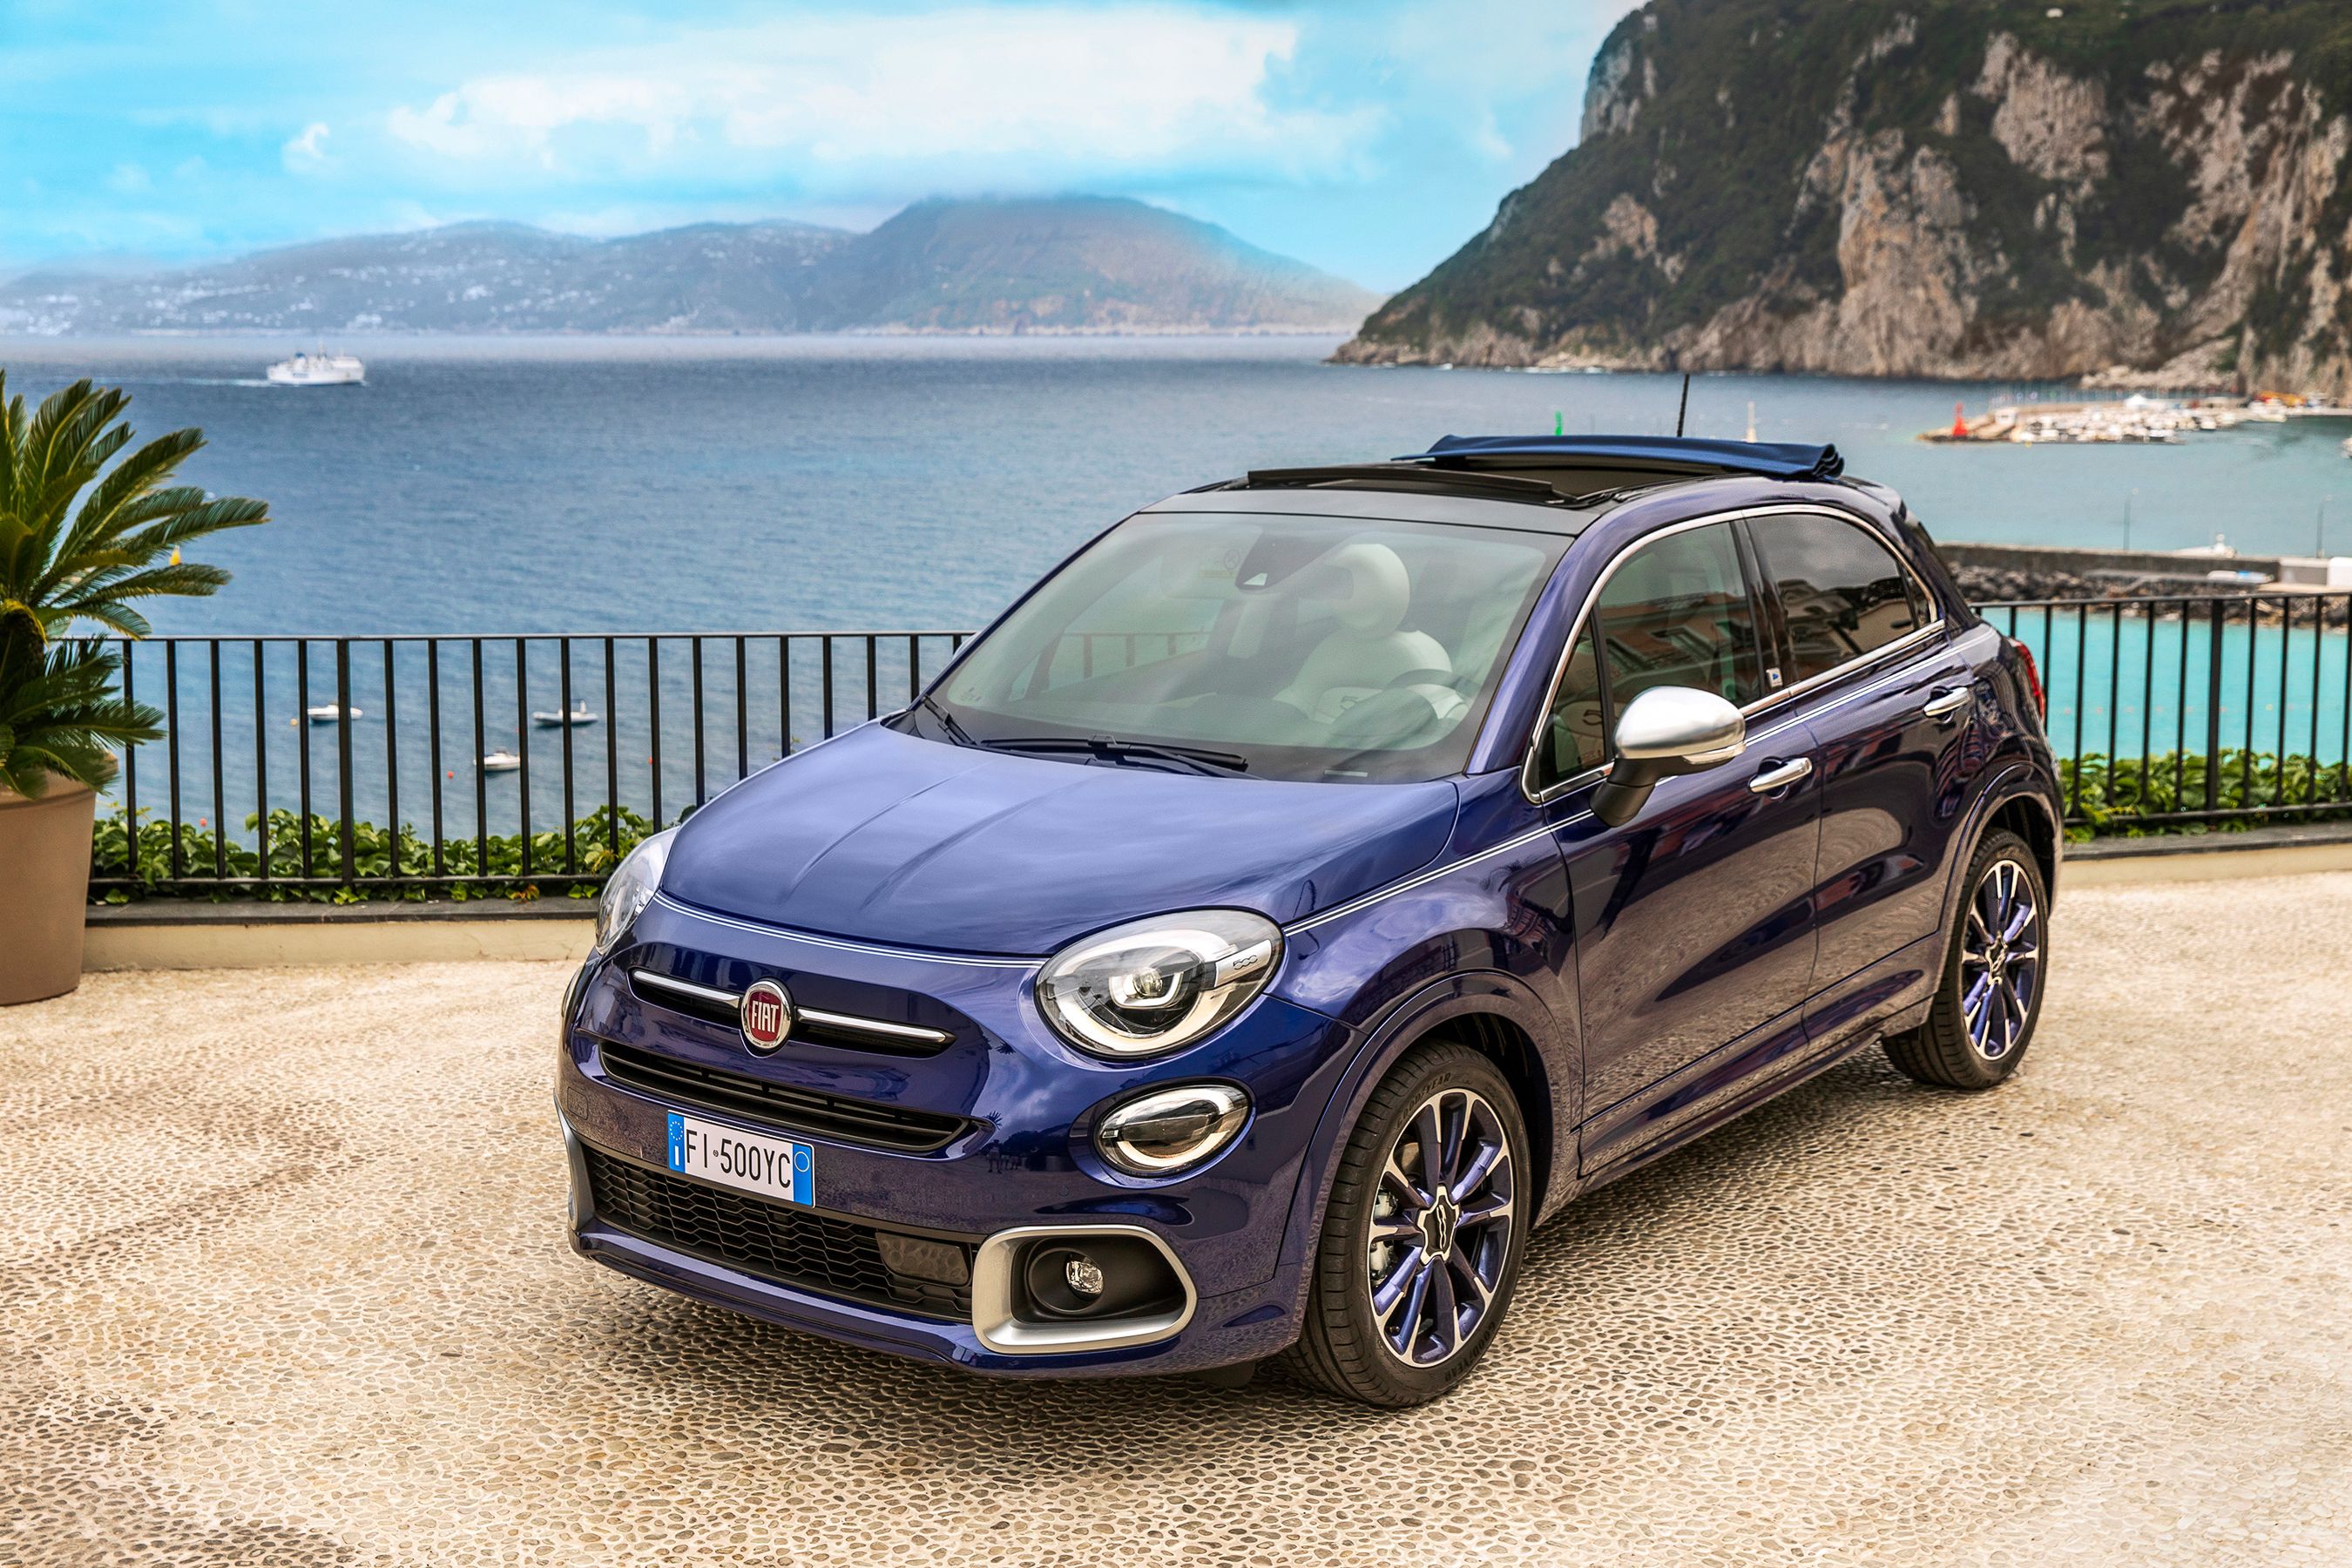 2023 FIAT® 500X Technology & Safety Features